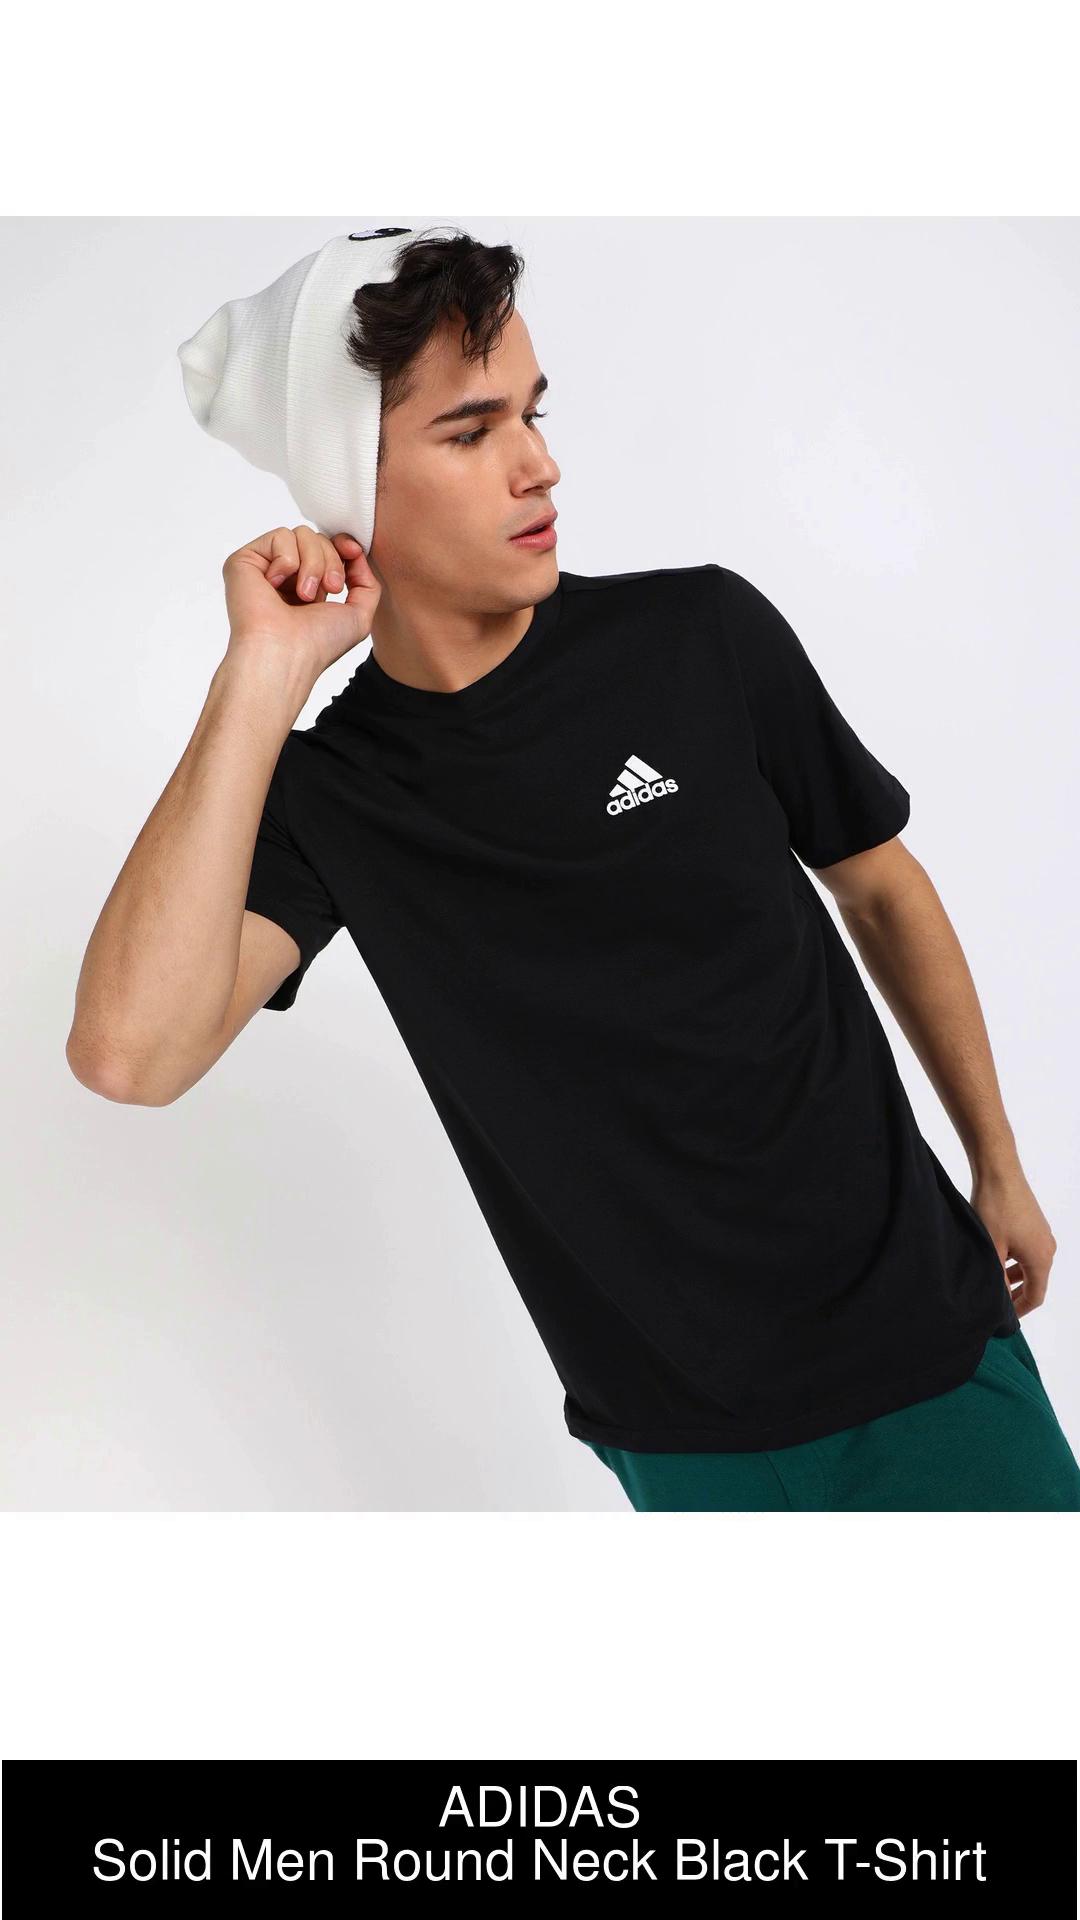 ADIDAS Solid Men Round Neck Black T-Shirt - Buy ADIDAS Solid Men Round Neck Black  T-Shirt Online at Best Prices in India